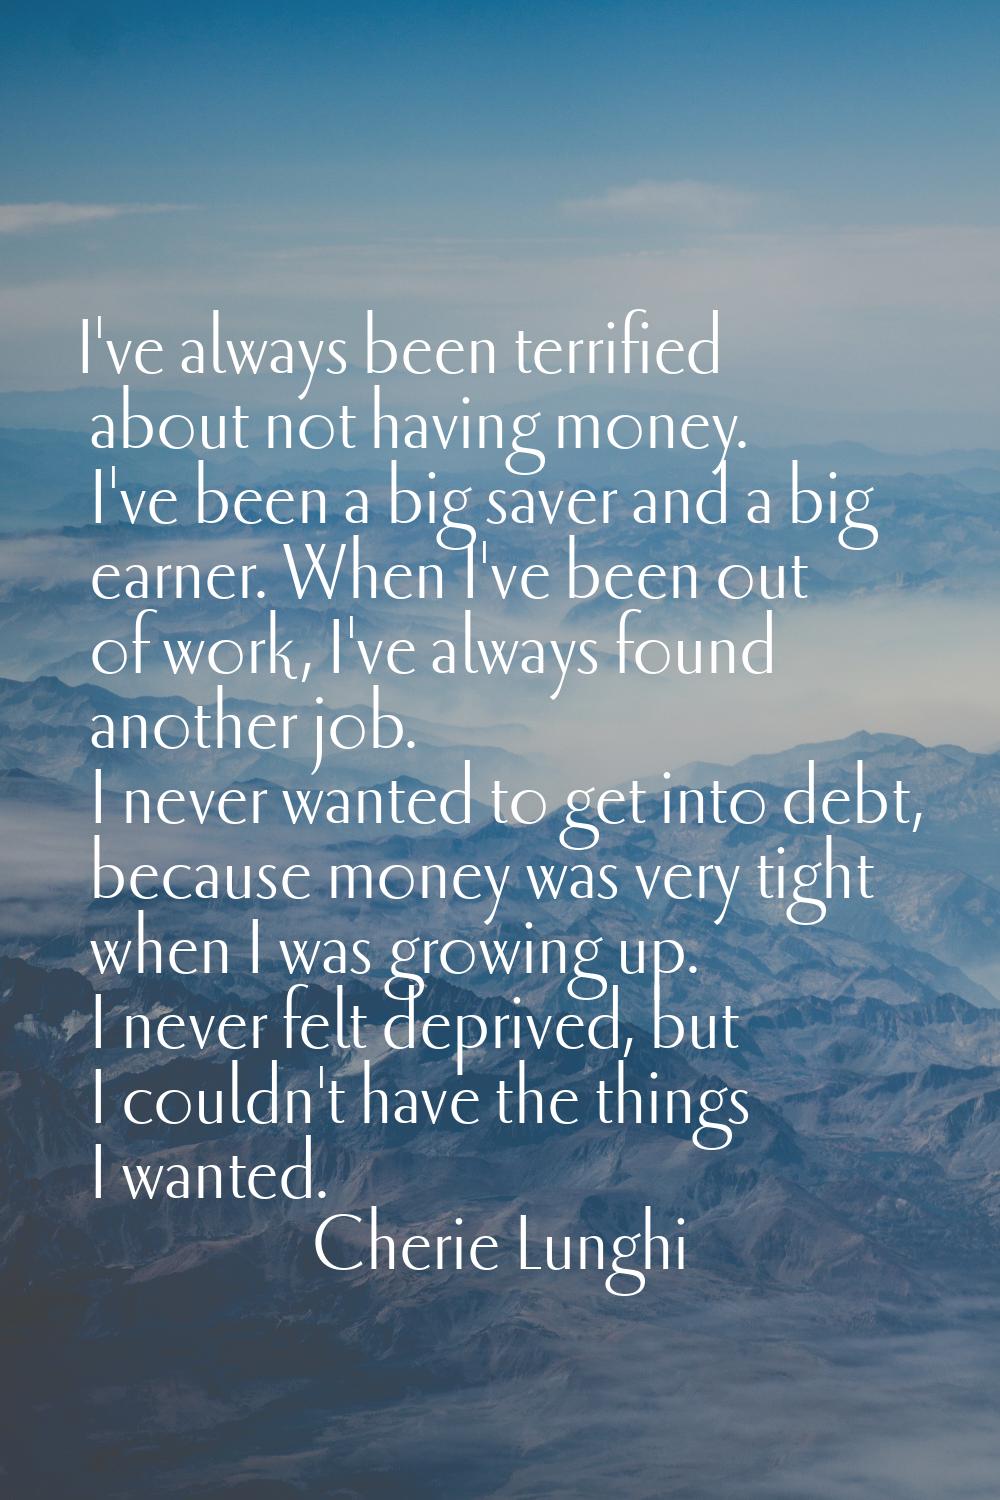 I've always been terrified about not having money. I've been a big saver and a big earner. When I'v